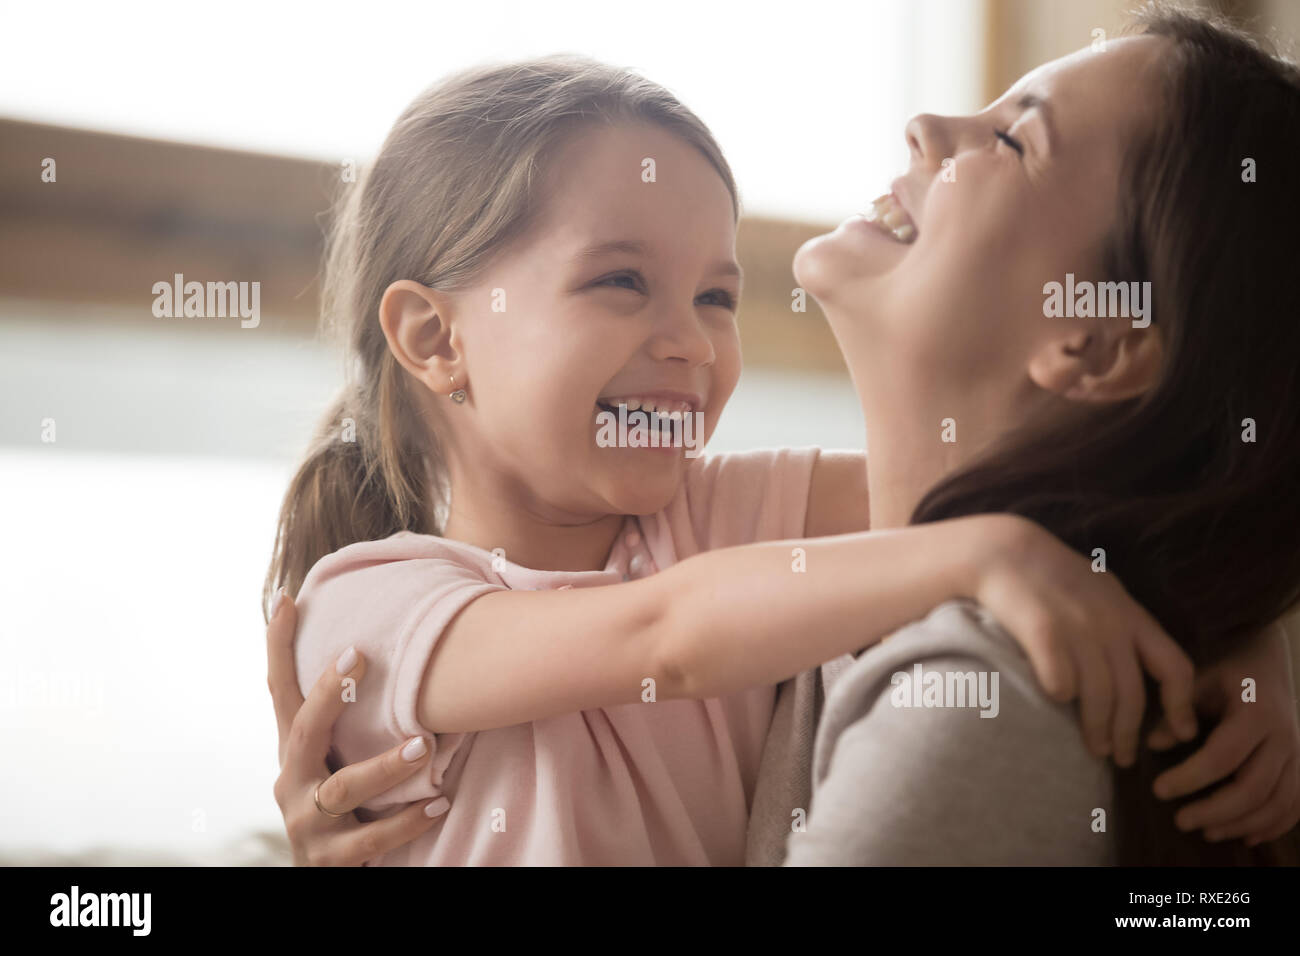 Cute kid girl and smiling mom laughing embracing cuddling together Stock Photo